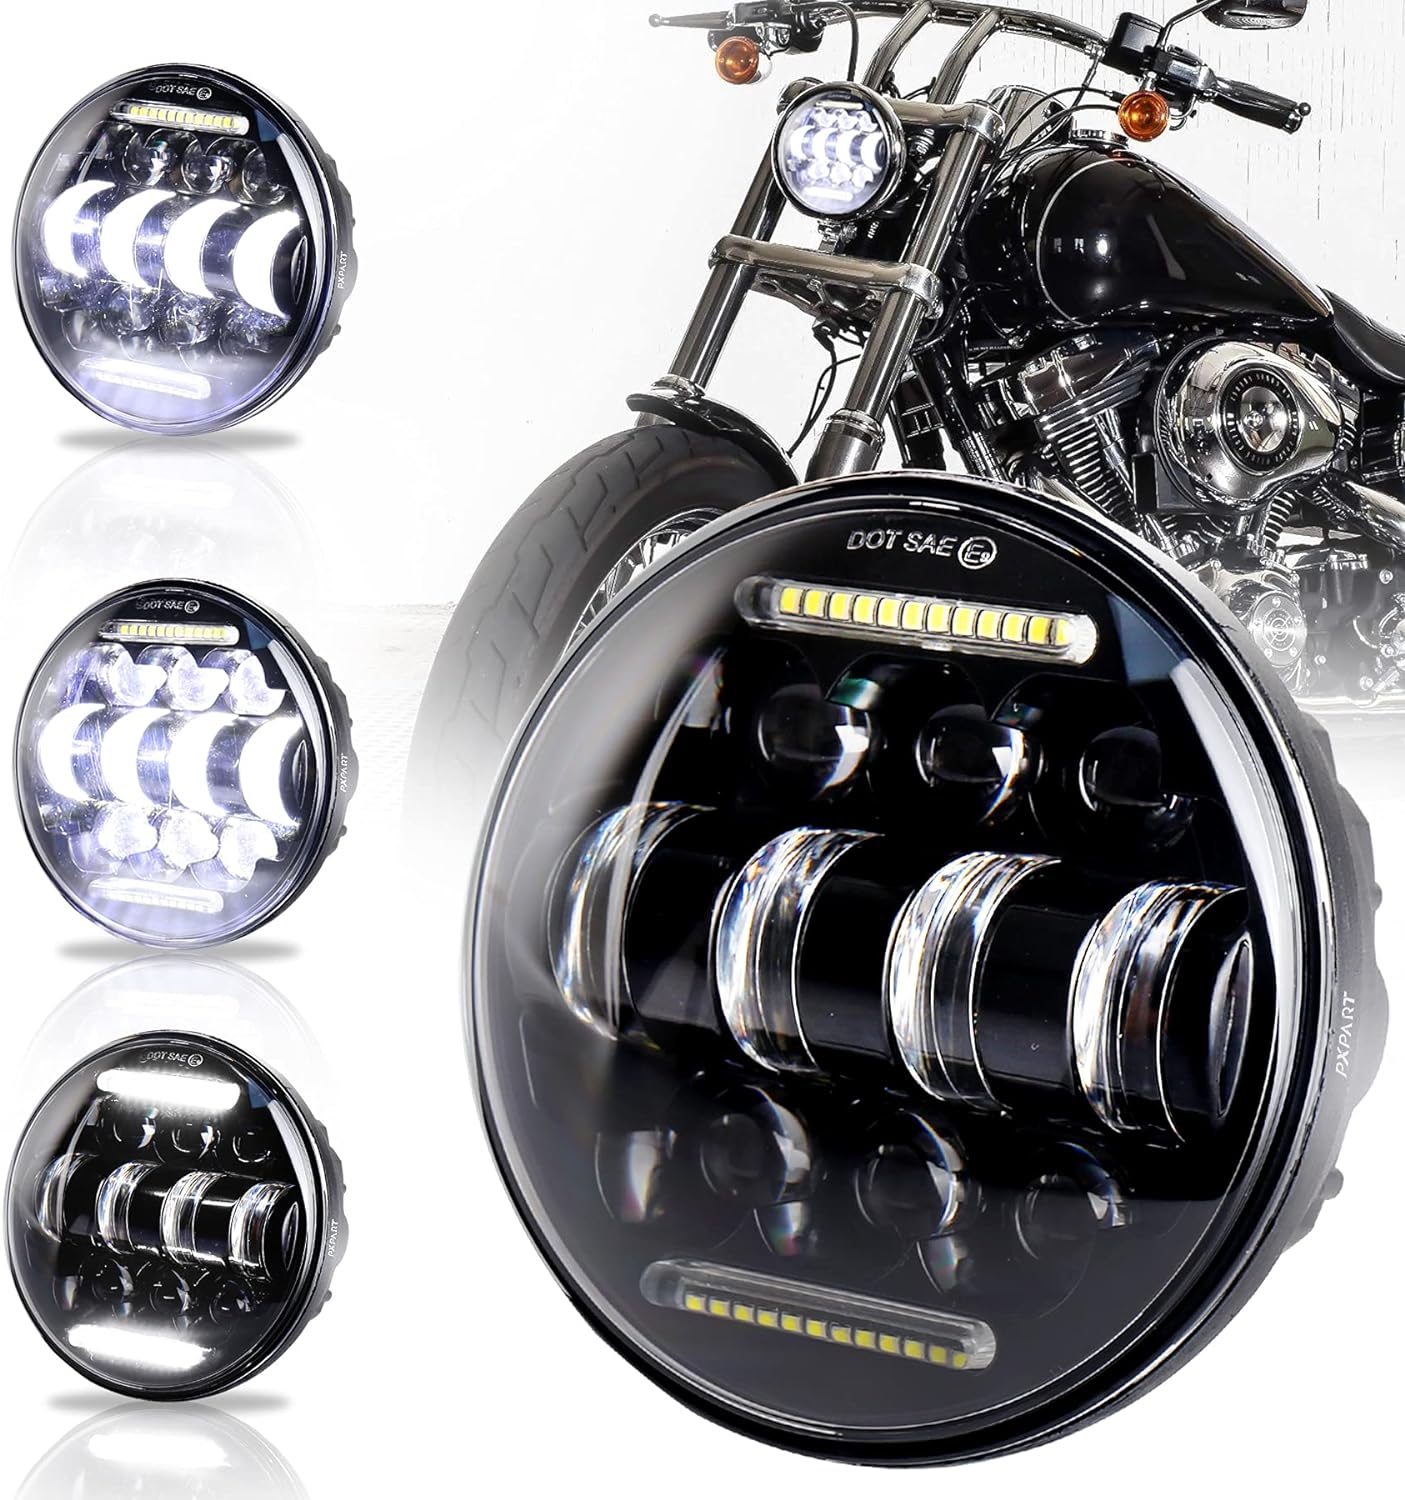 5.75 inch LED Headlight with White Halo DRL 66W Motorcycle Driving Headlight for Harley Davidson Dyna Sportster Iron 883 Low Rider Street Bob Softail Black